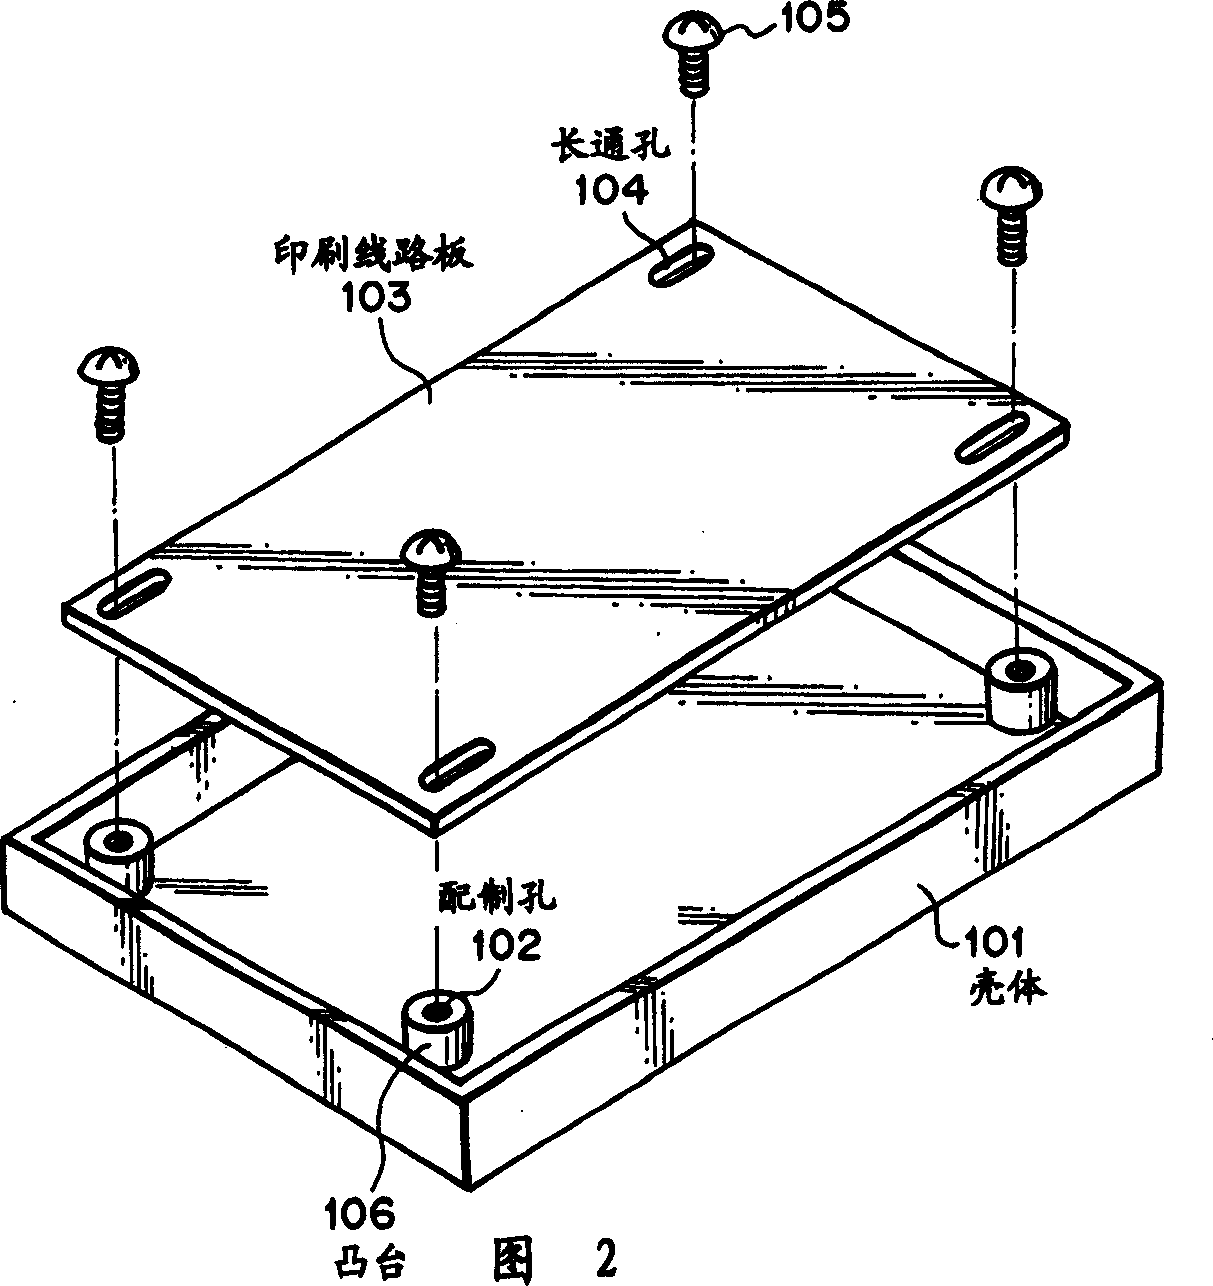 Deformation-resistant installation structure for portable apparatus